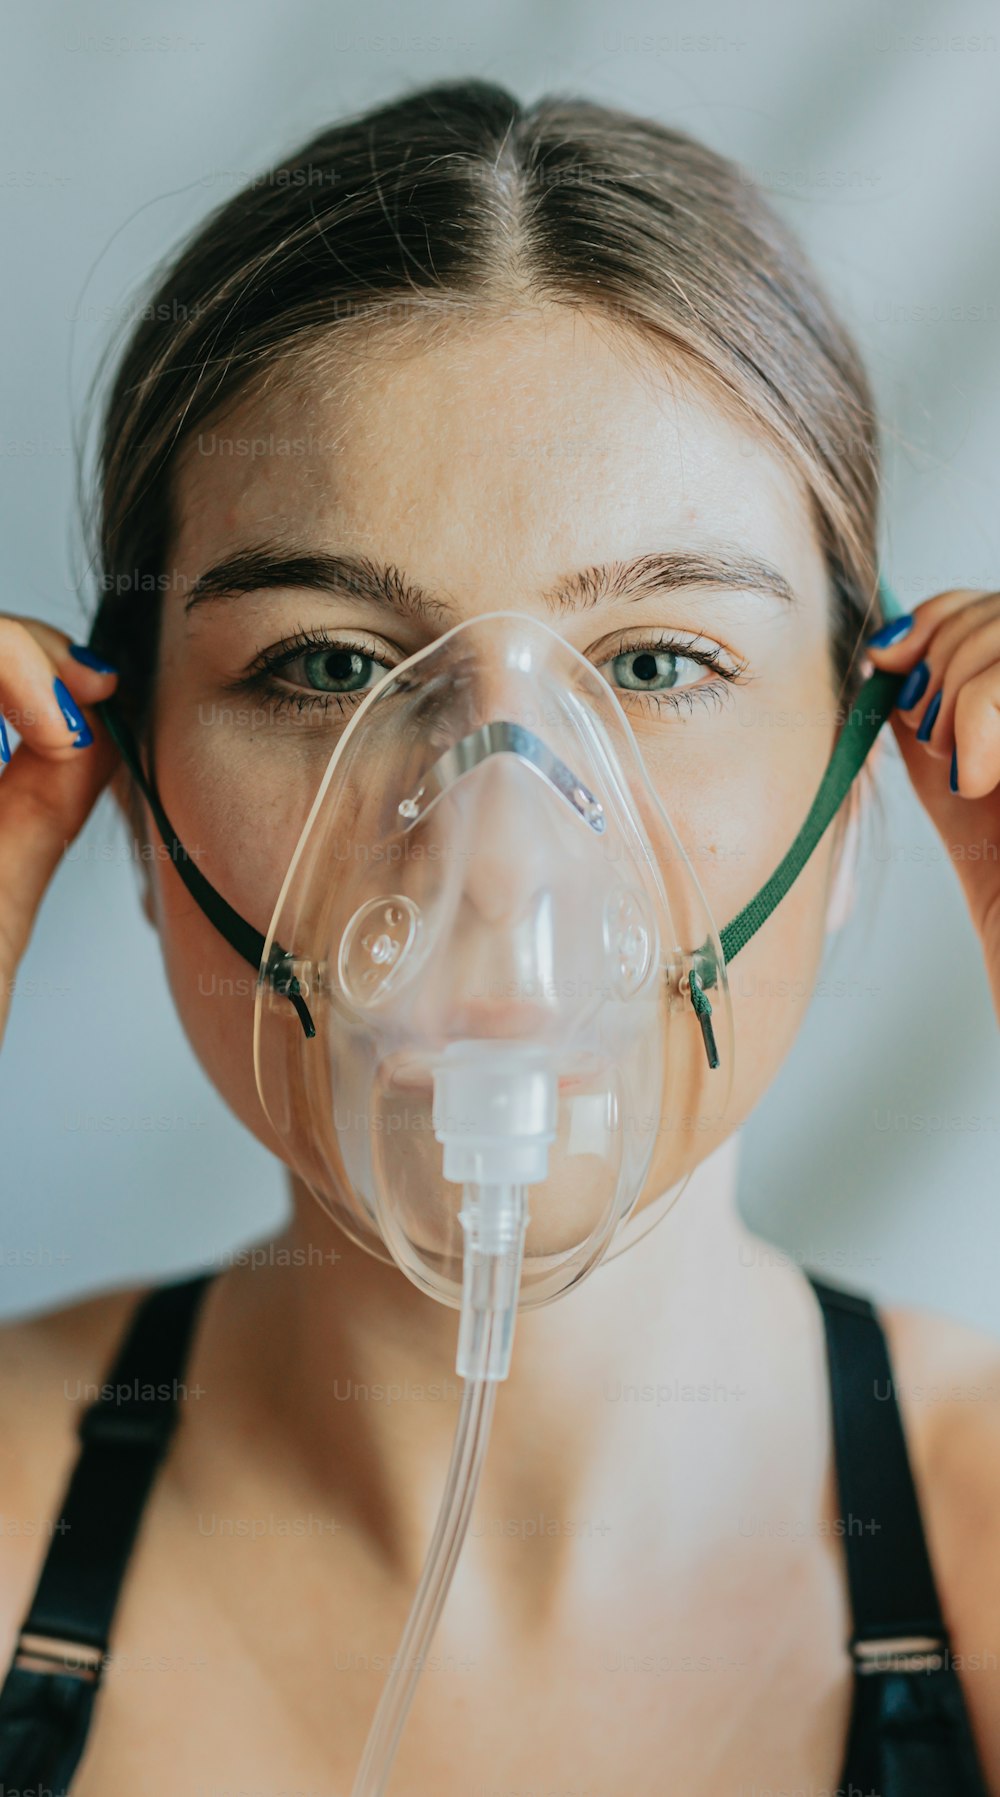 a woman wearing an oxygen mask with a breathing tube attached to her face